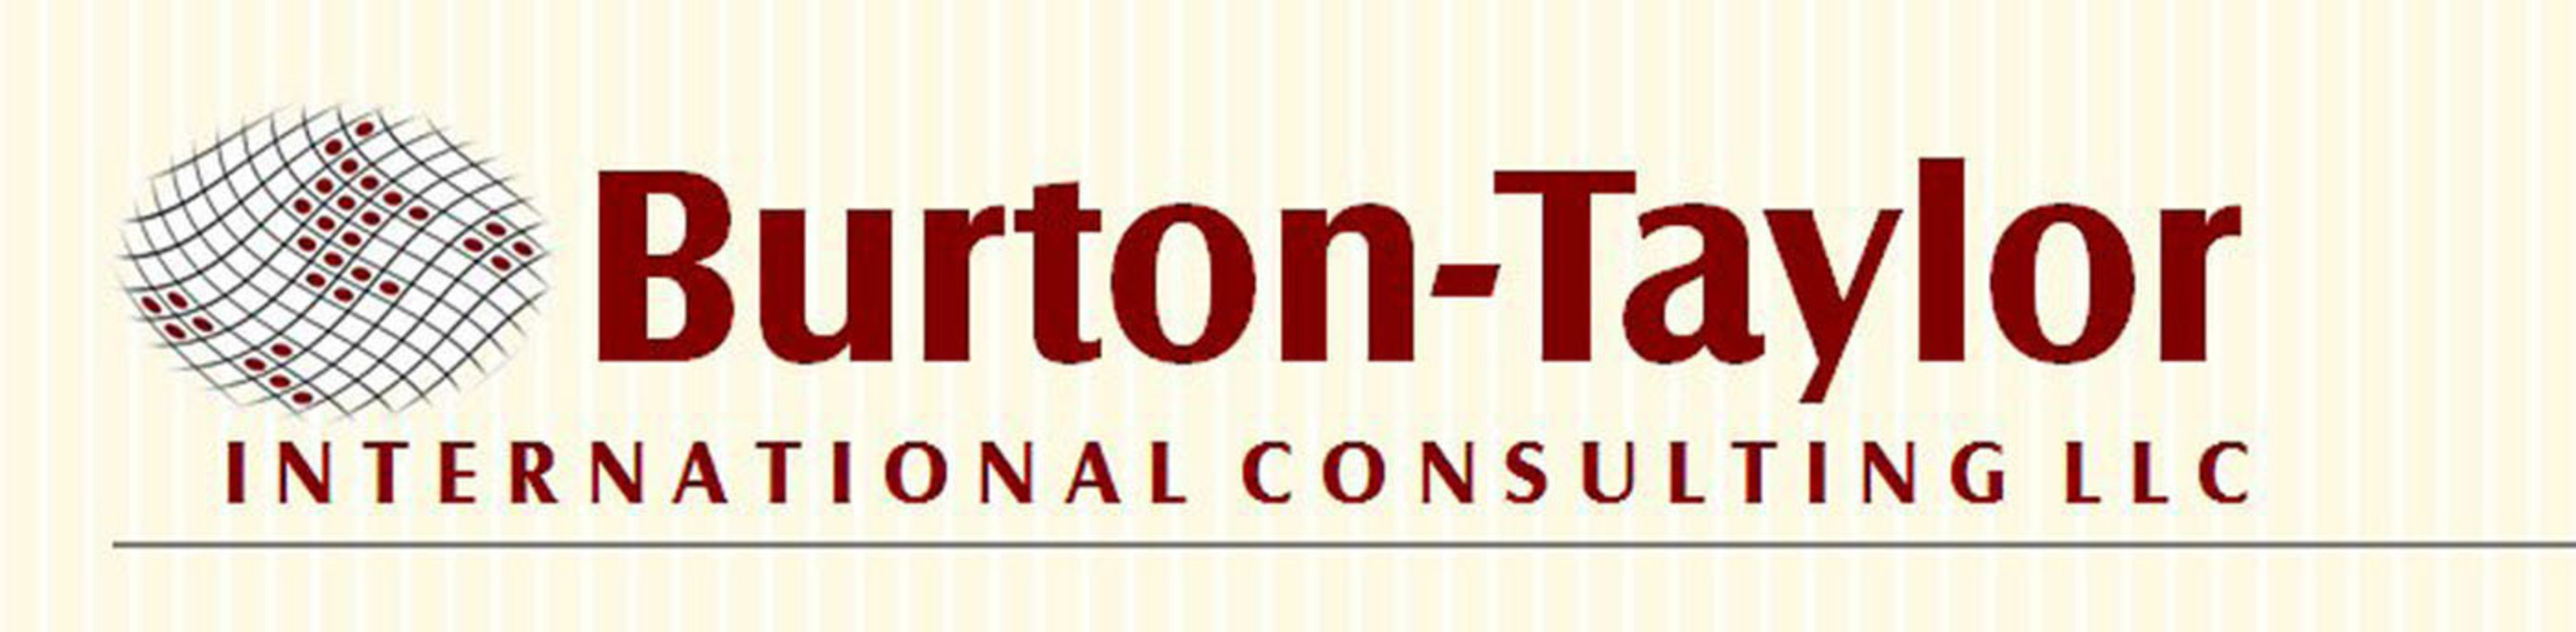 Burton-Taylor International Consulting LLC is a recognized leader in information industry market research, strategy and business consulting. Burton-Taylor market share figures are seen as standards globally. Burton-Taylor clients command an estimated 80% of global revenue share in the market data space and include the world's largest information providers, the world's biggest exchange groups, key government organizations and regulatory bodies on multiple continents, the largest advisory firms serving the industry, and more than 30 of the most active private equity and investment companies around the world... all of which using Burton-Taylor data as their industry benchmark.